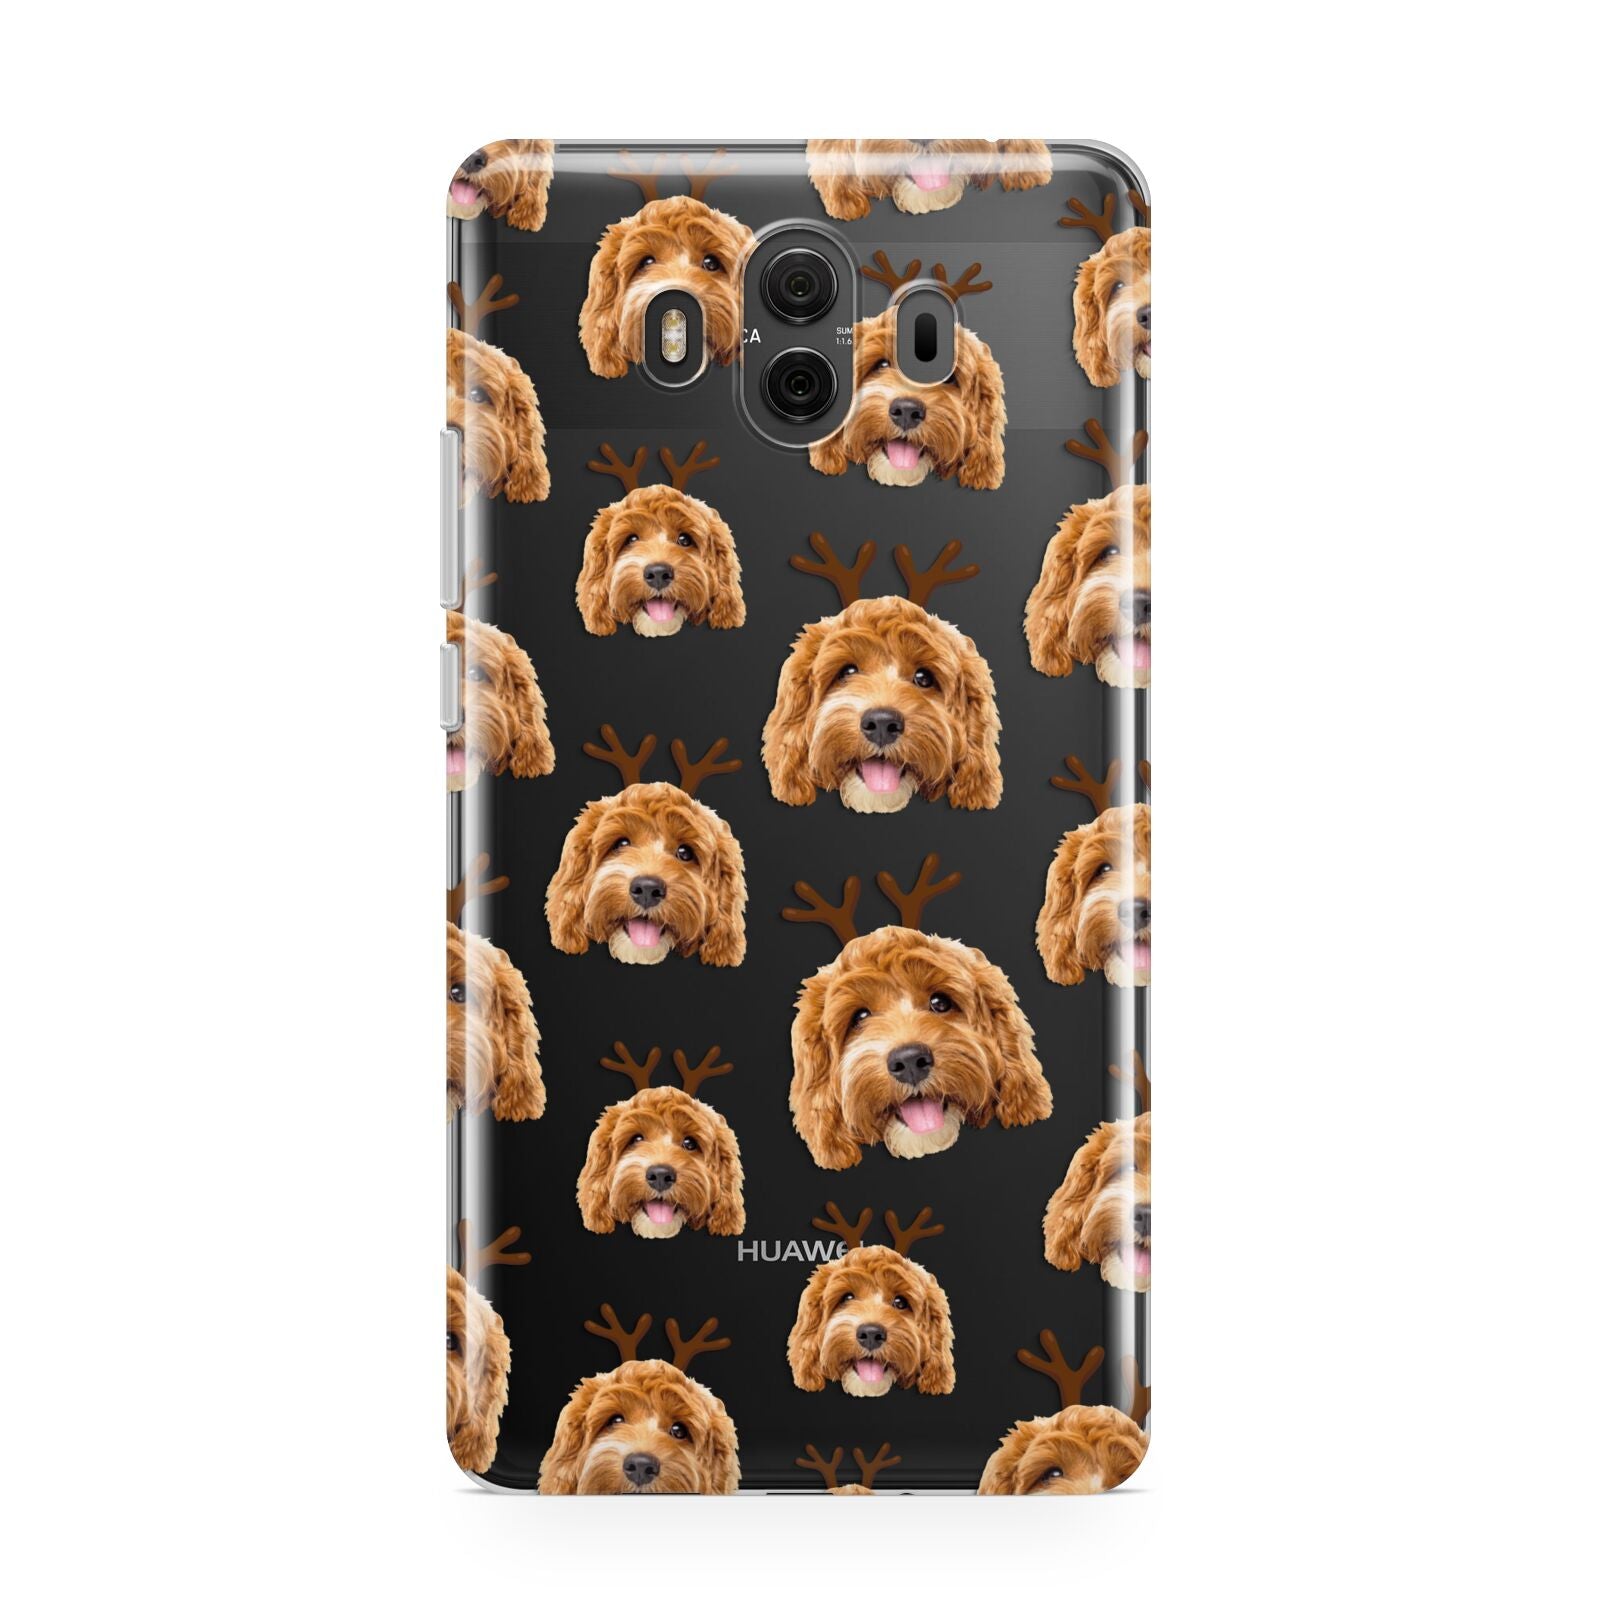 Personalised Christmas Dog Antler Huawei Mate 10 Protective Phone Case